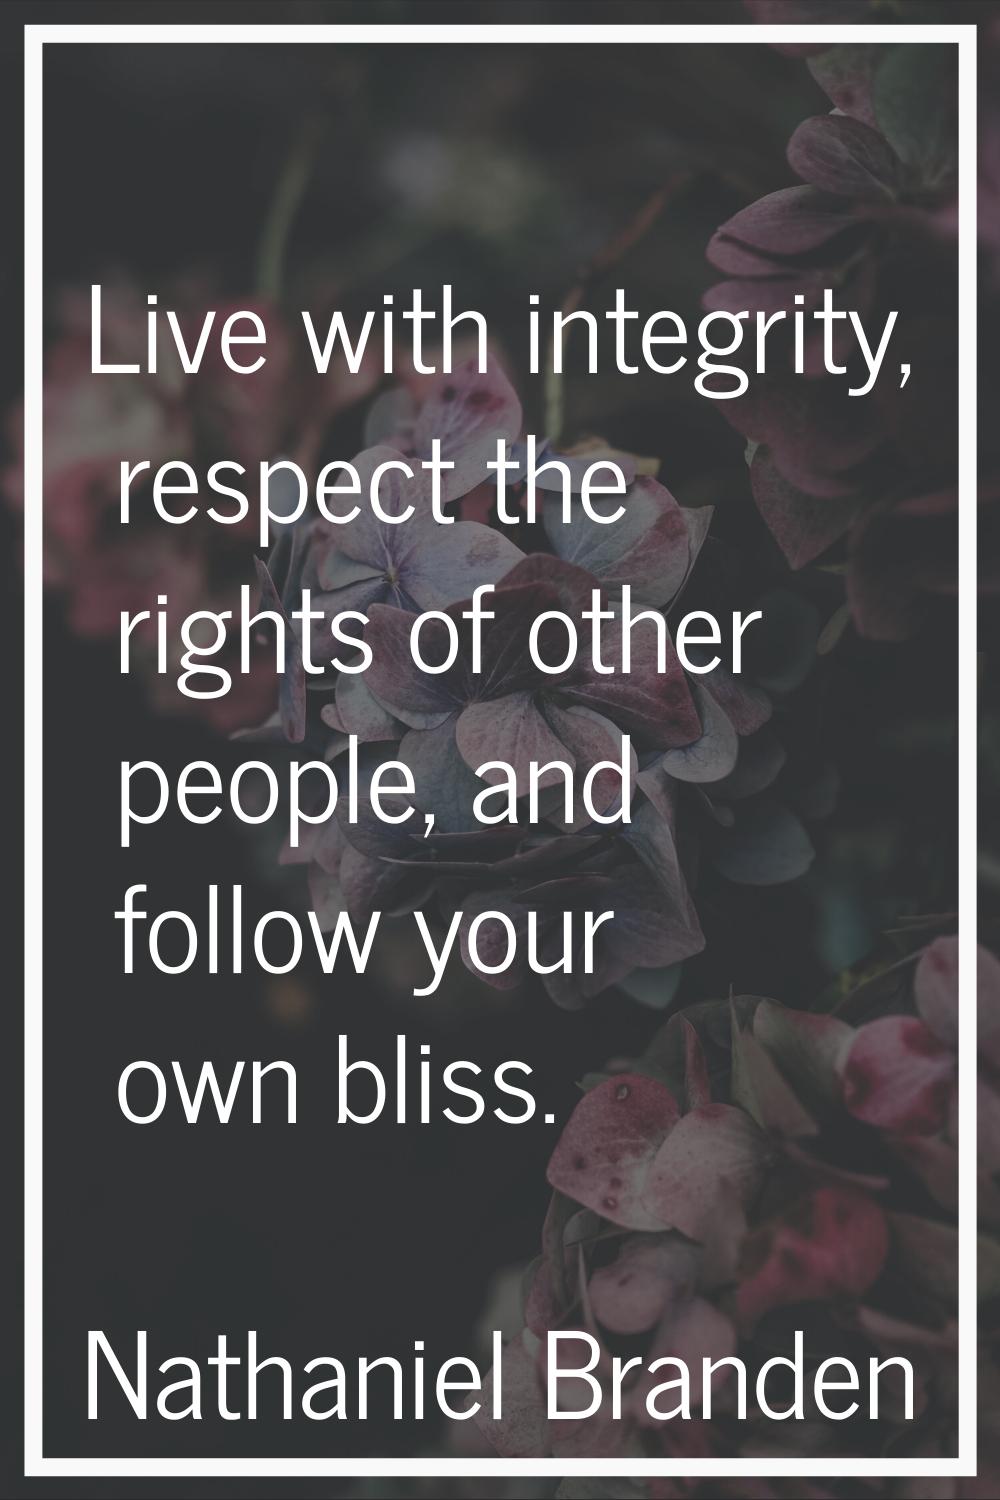 Live with integrity, respect the rights of other people, and follow your own bliss.